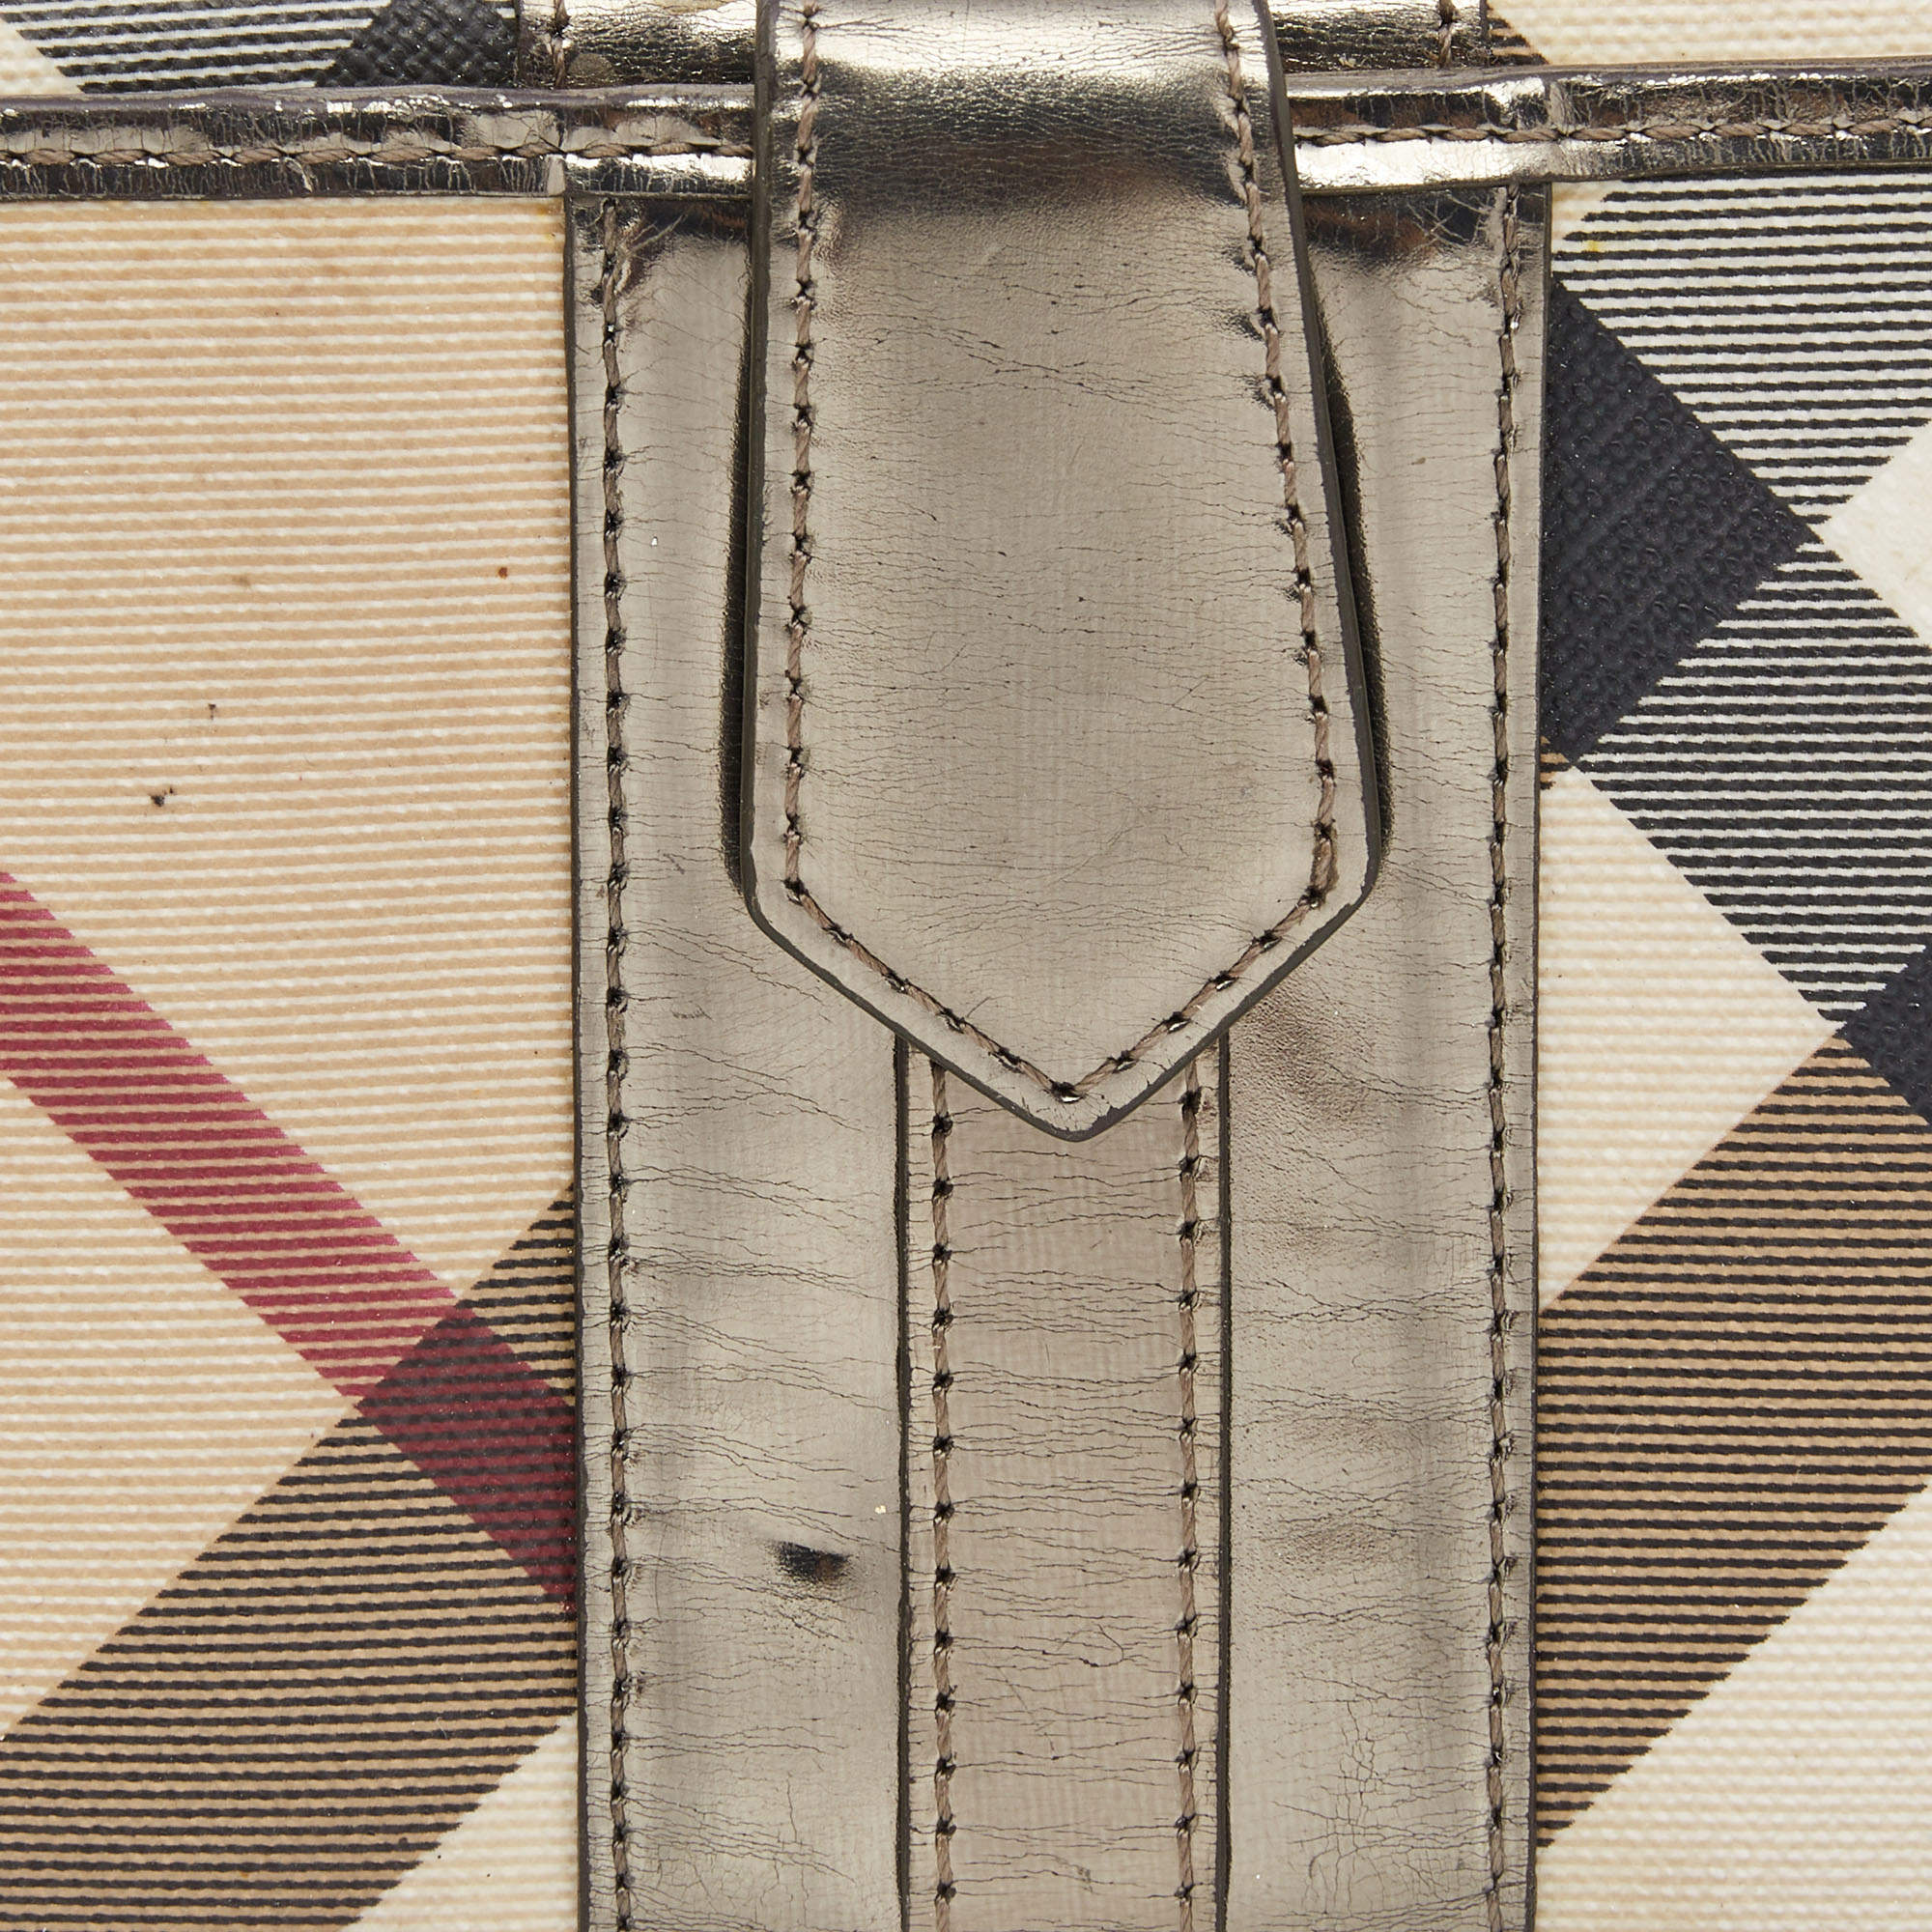 Burberry Metallic/Beige Housecheck PVC and Patent Leather French Wallet  Burberry | The Luxury Closet